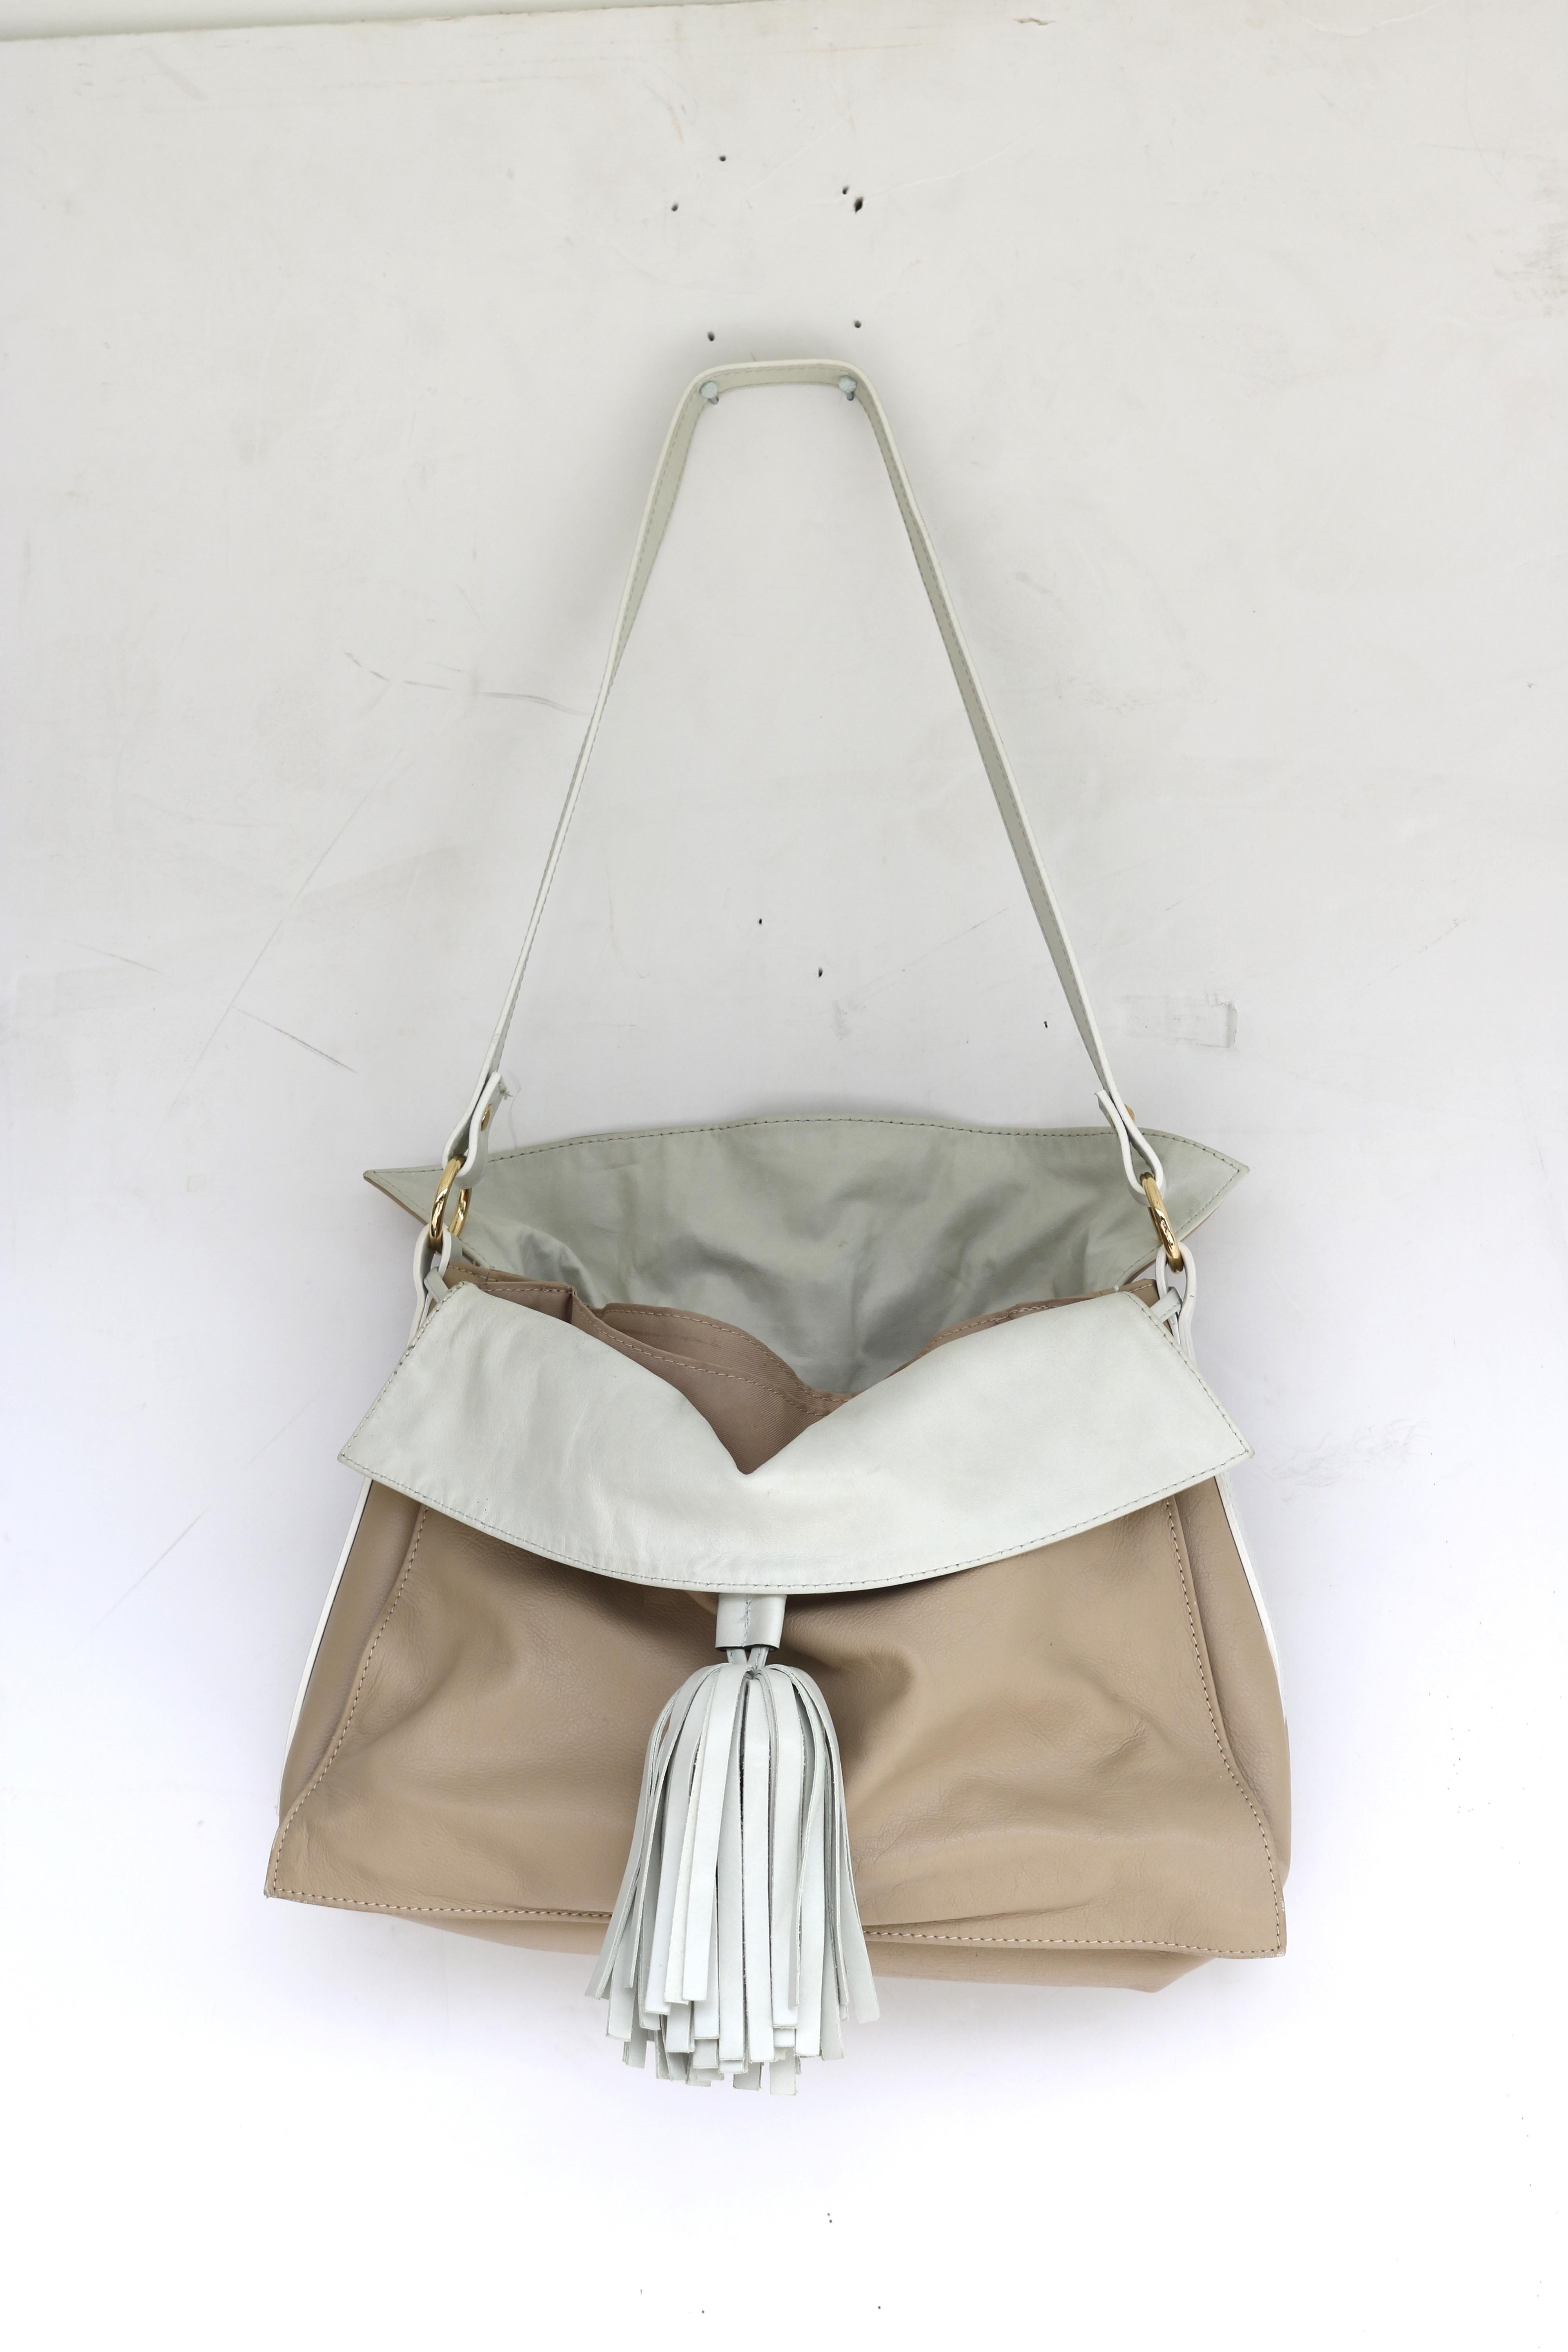 Stylish Fine Beige Leather with Large Oyster White Leather Tassel and leather  fold over front and back flaps Slouch Shoulder Handbag- gold tone hardware, magnetic closing.  Made in Italy- circa 1980s.
A chic Valentino style handbag with slouchy